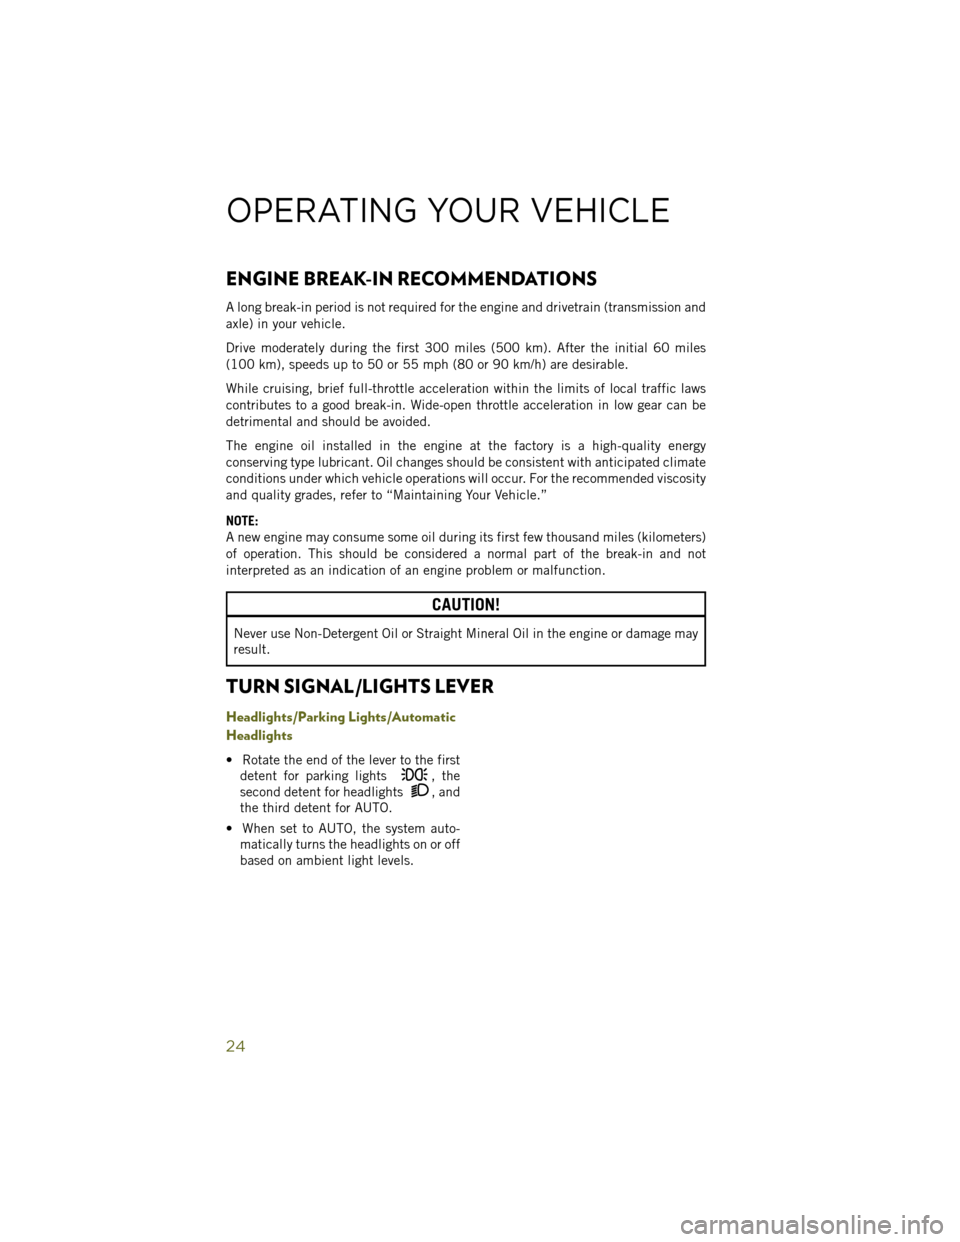 JEEP WRANGLER 2014 JK / 3.G User Guide ENGINE BREAK-IN RECOMMENDATIONS
A long break-in period is not required for the engine and drivetrain (transmission and
axle) in your vehicle.
Drive moderately during the first 300 miles (500 km). Afte